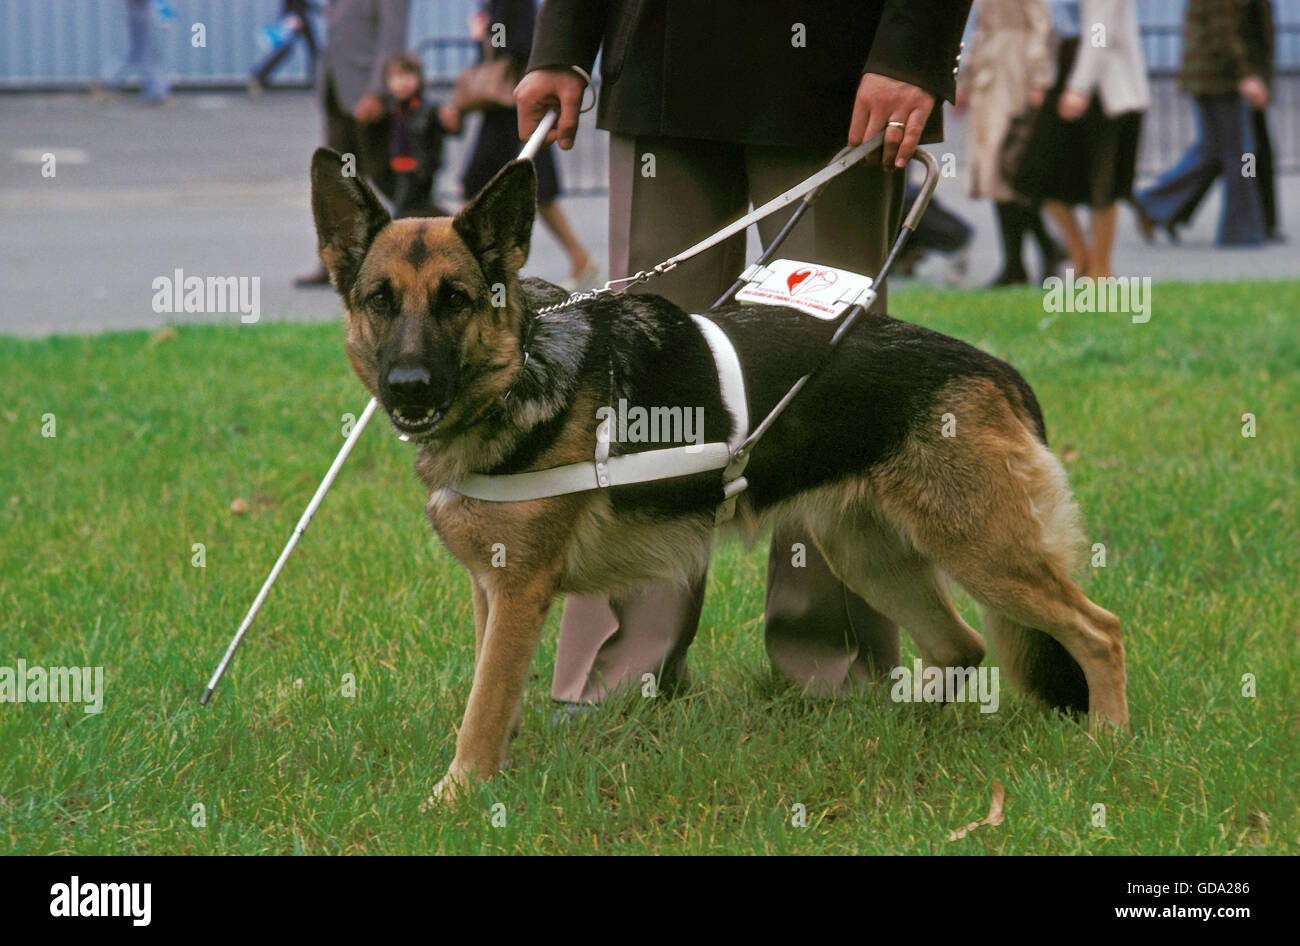 German Shepherd Dog, Guide Dog for Blind, walking with owner Stock Photo